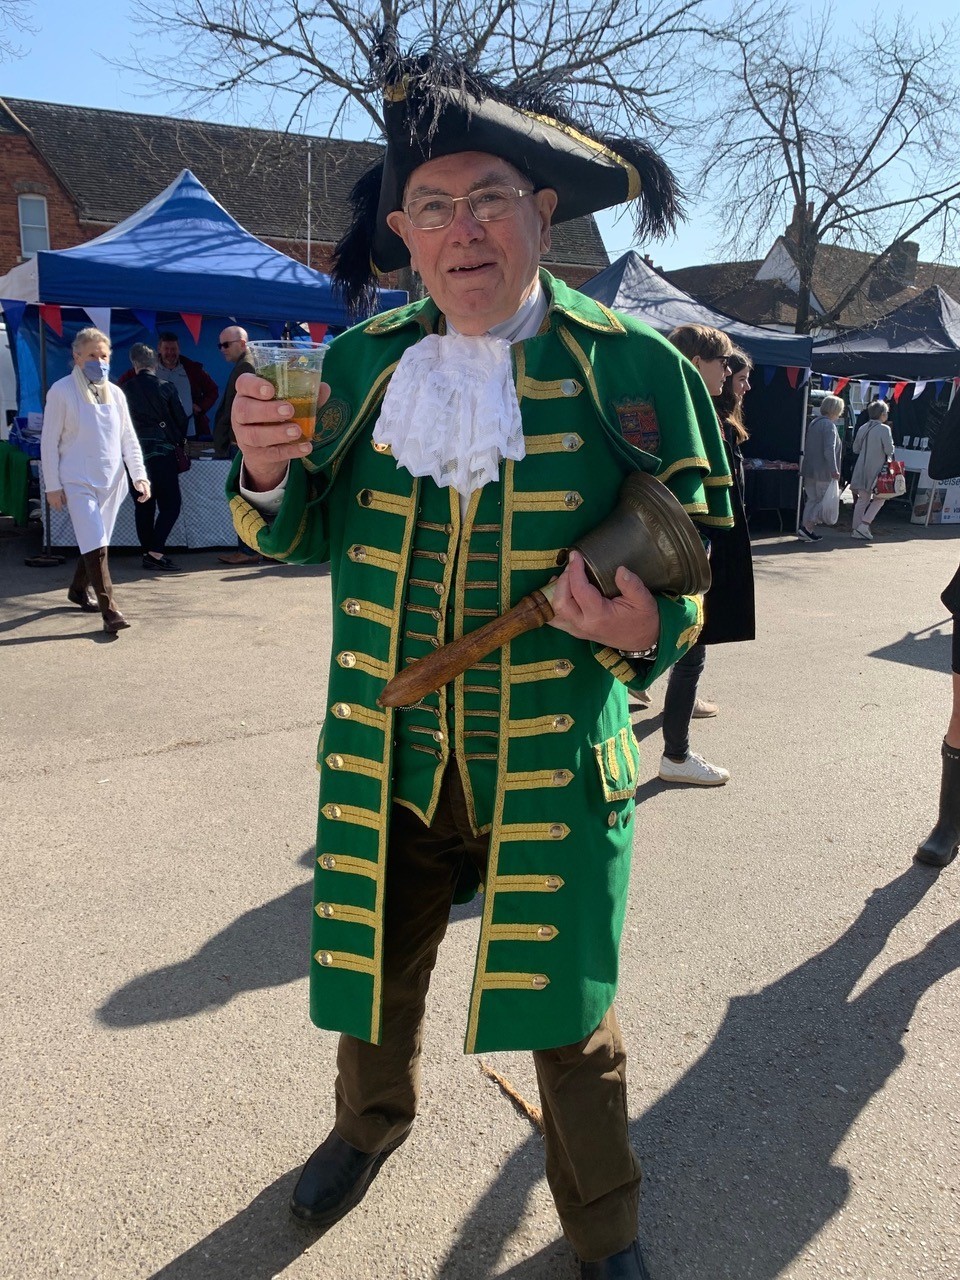 The town crier was out and about 